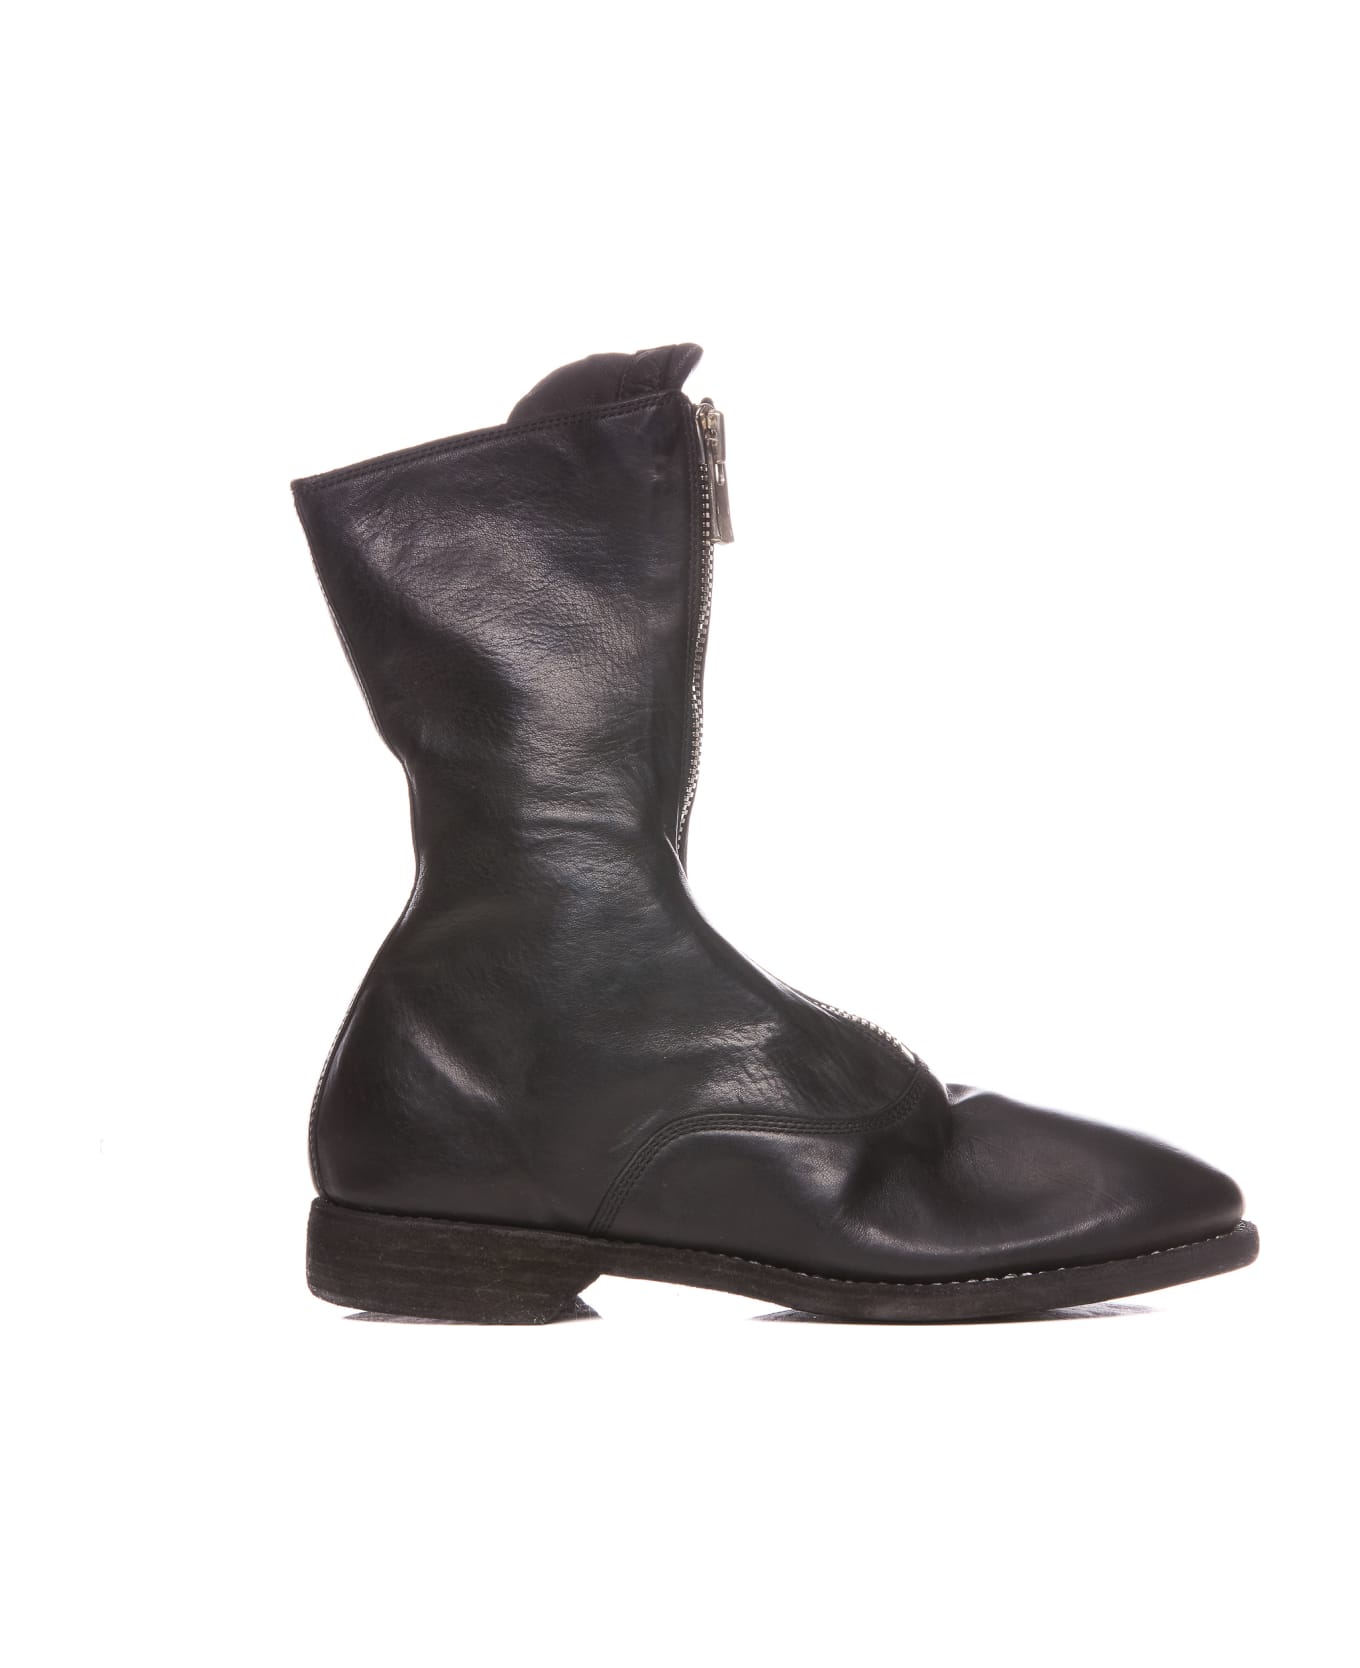 Guidi Front Zip Army Boots - Black ブーツ